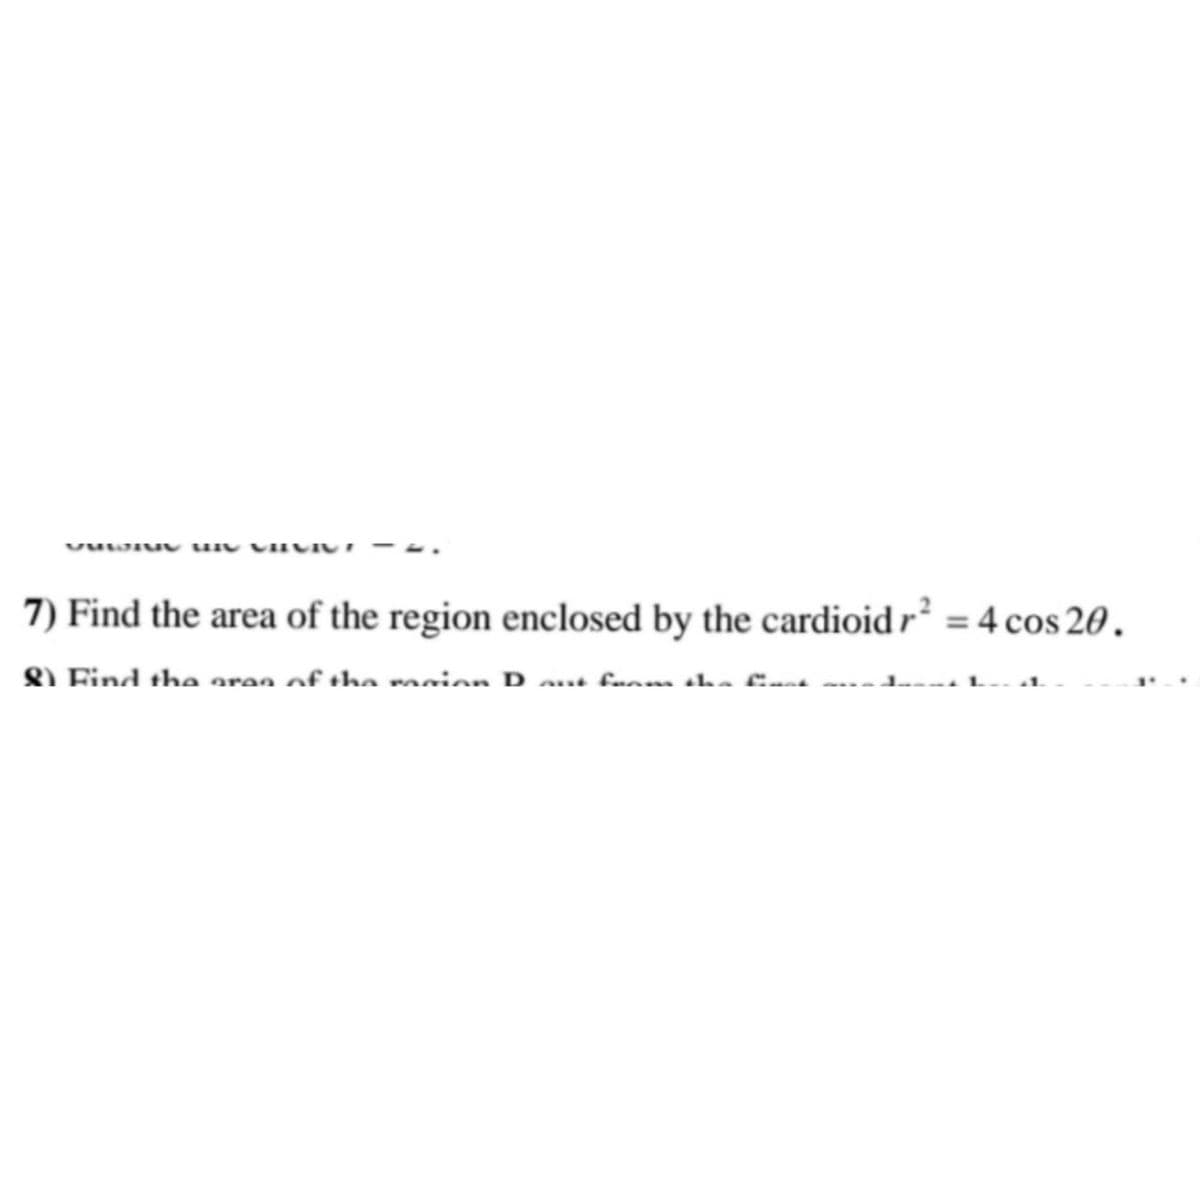 VUWIU III
7) Find the area of the region enclosed by the cardioid r² = 4 cos 20.
8) Find the area of the main Daut from the first